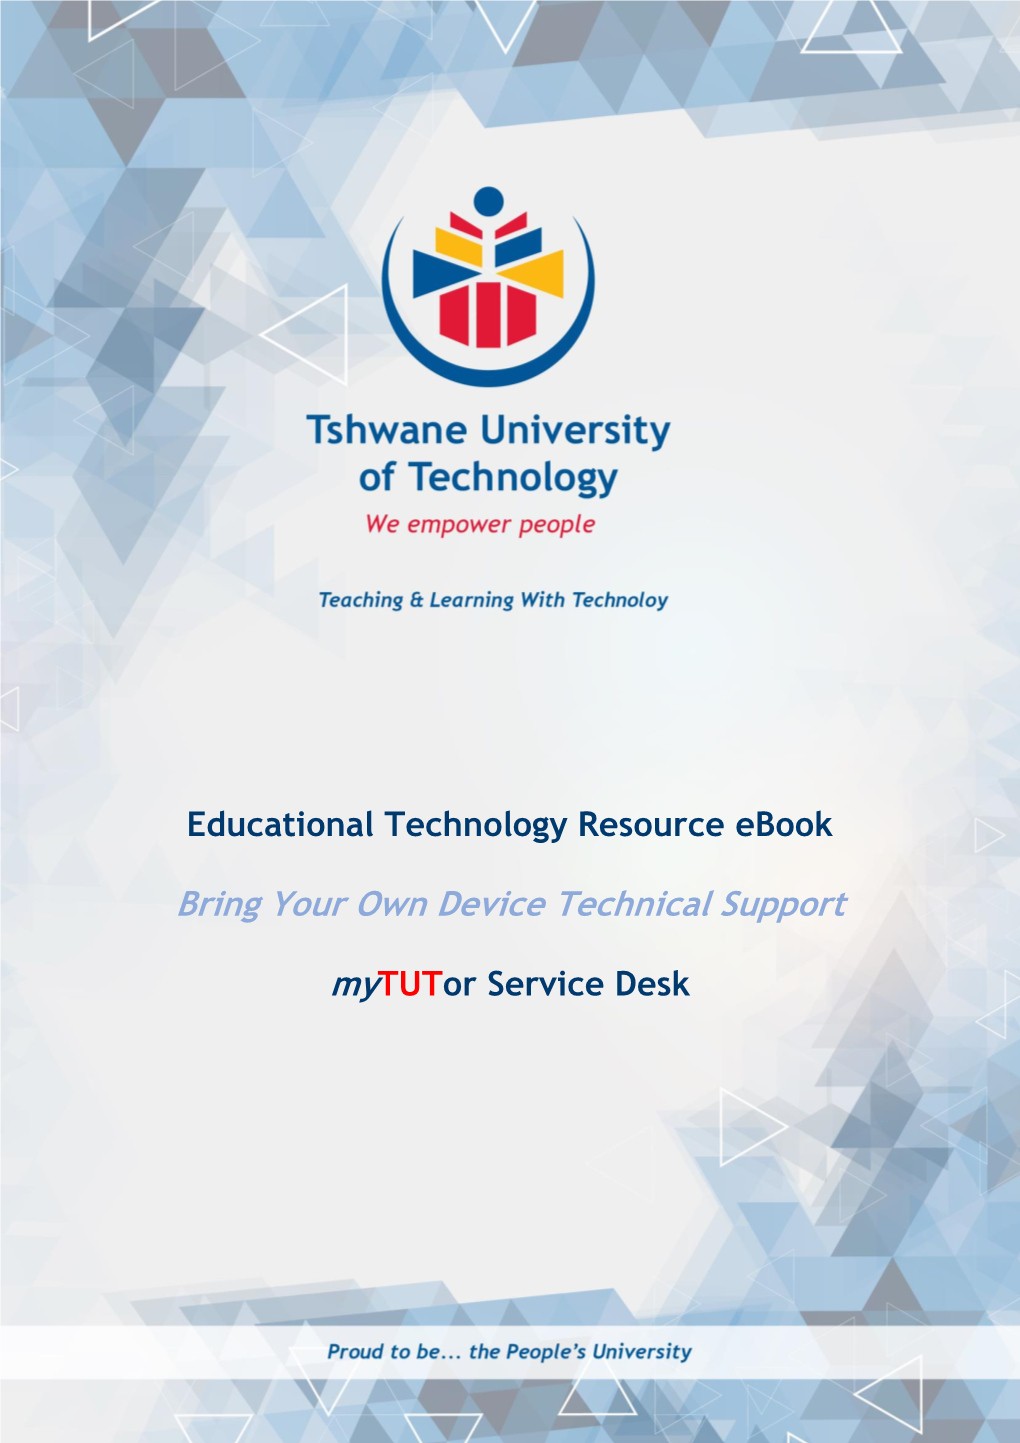 Educational Technology Resource Ebook – Bring Your Own Device Technical Support